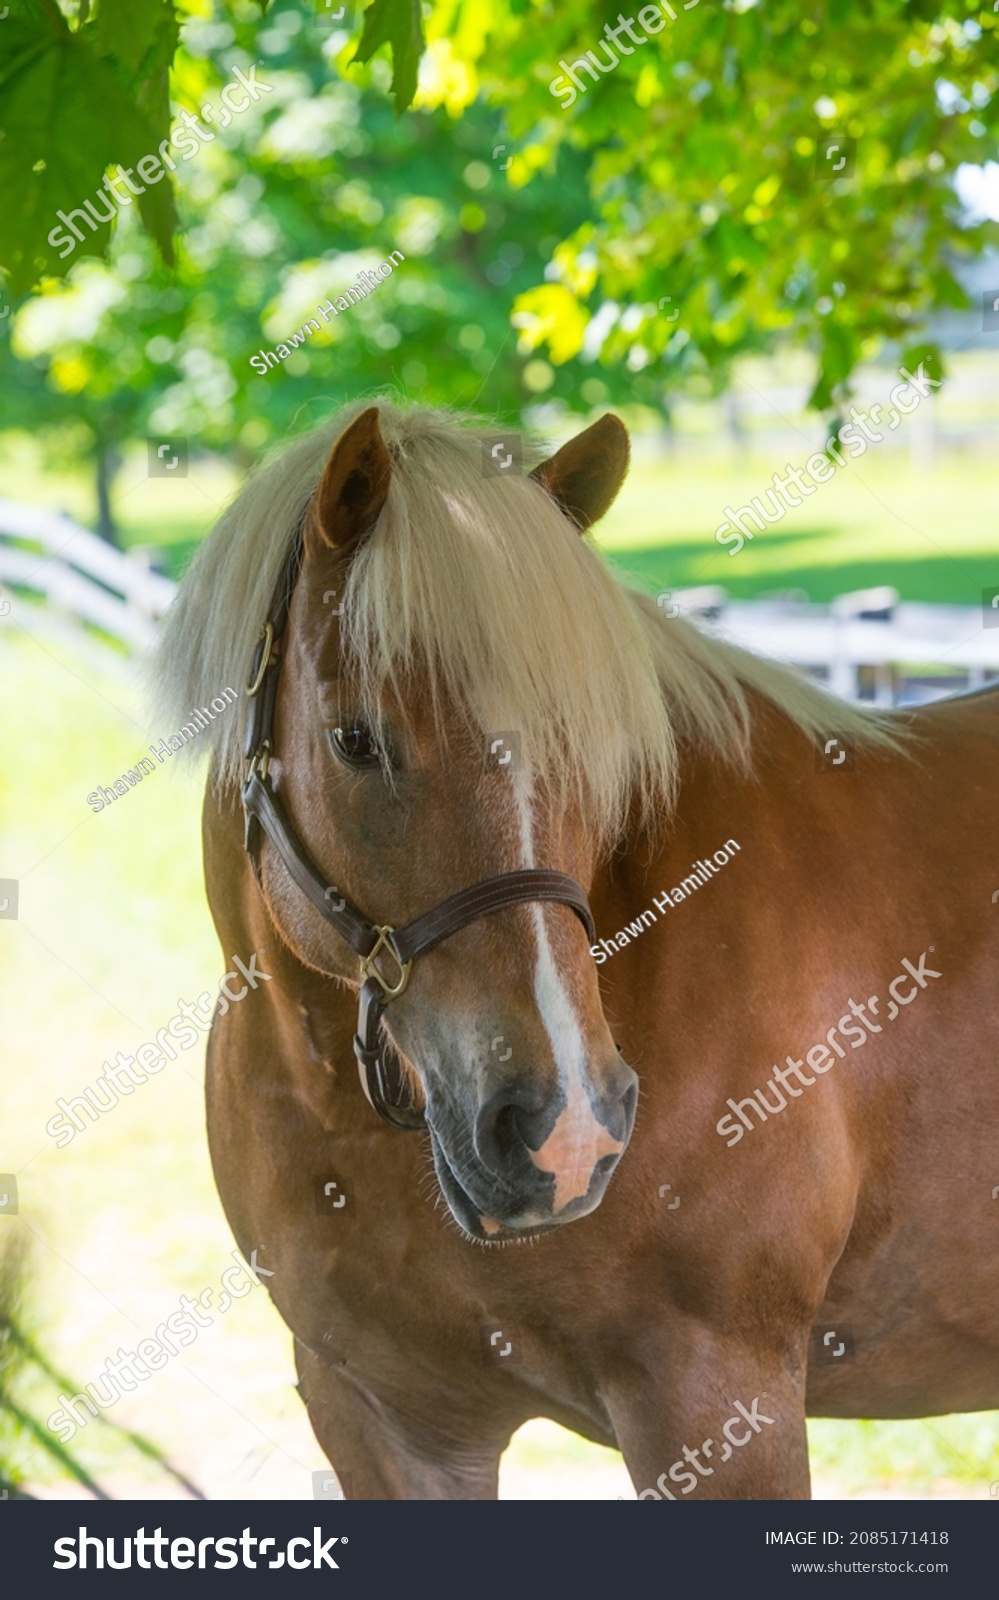 horse portrait shot of haflinger breed of horse head shot of equine light brown in colour with flax mane and long forelock white blaze leather halter vertical format with room for type or masthead  #2085171418